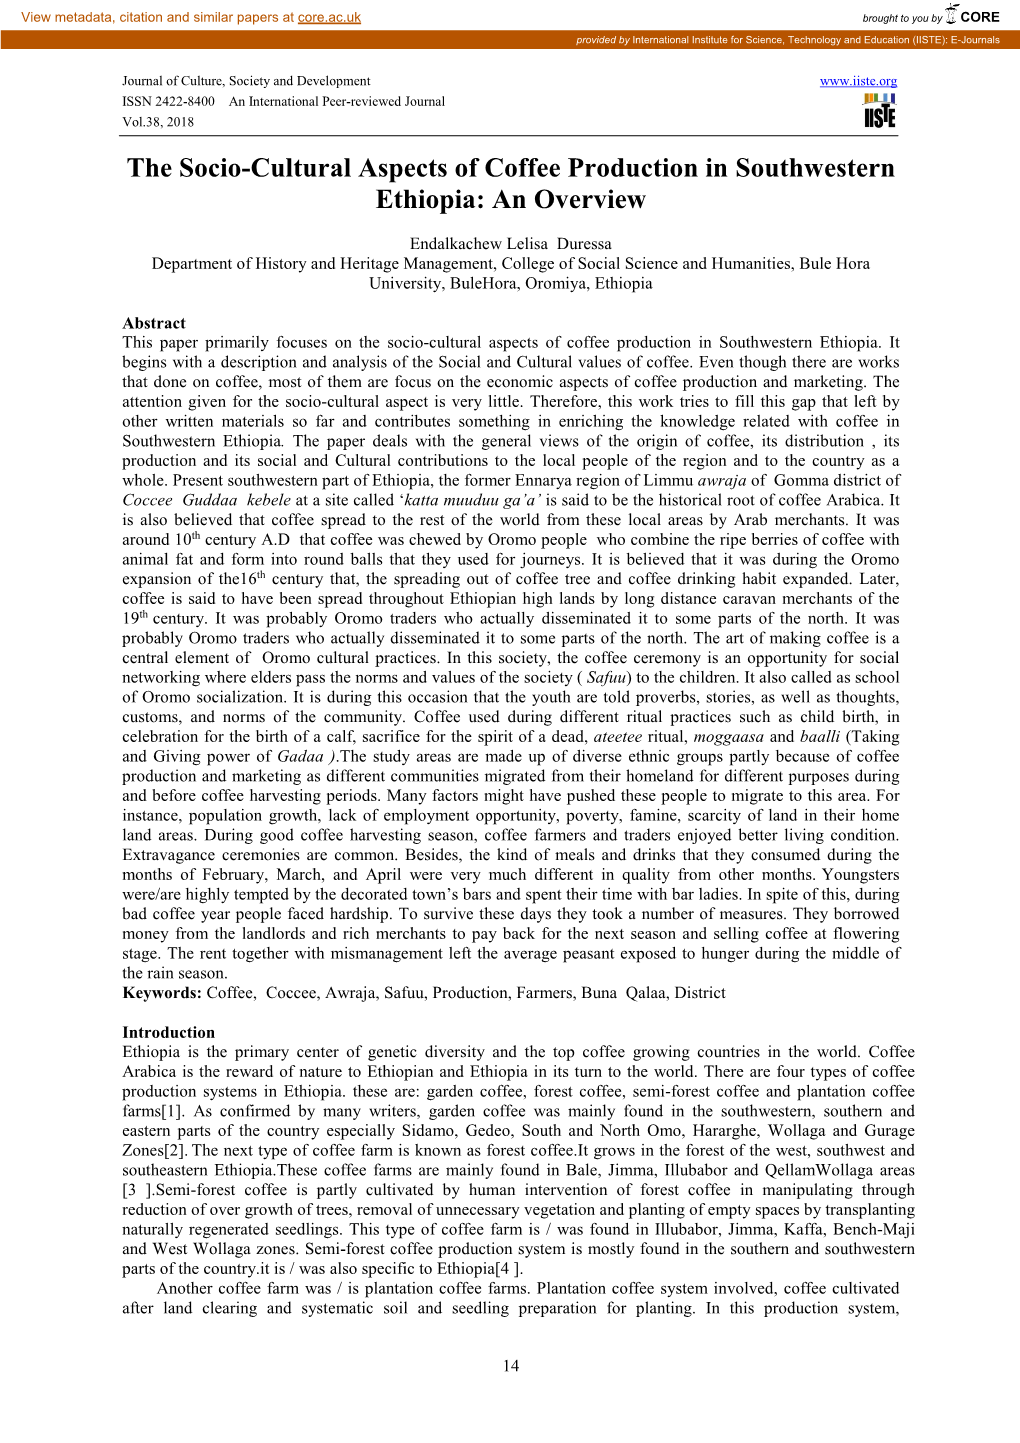 The Socio-Cultural Aspects of Coffee Production in Southwestern Ethiopia: an Overview